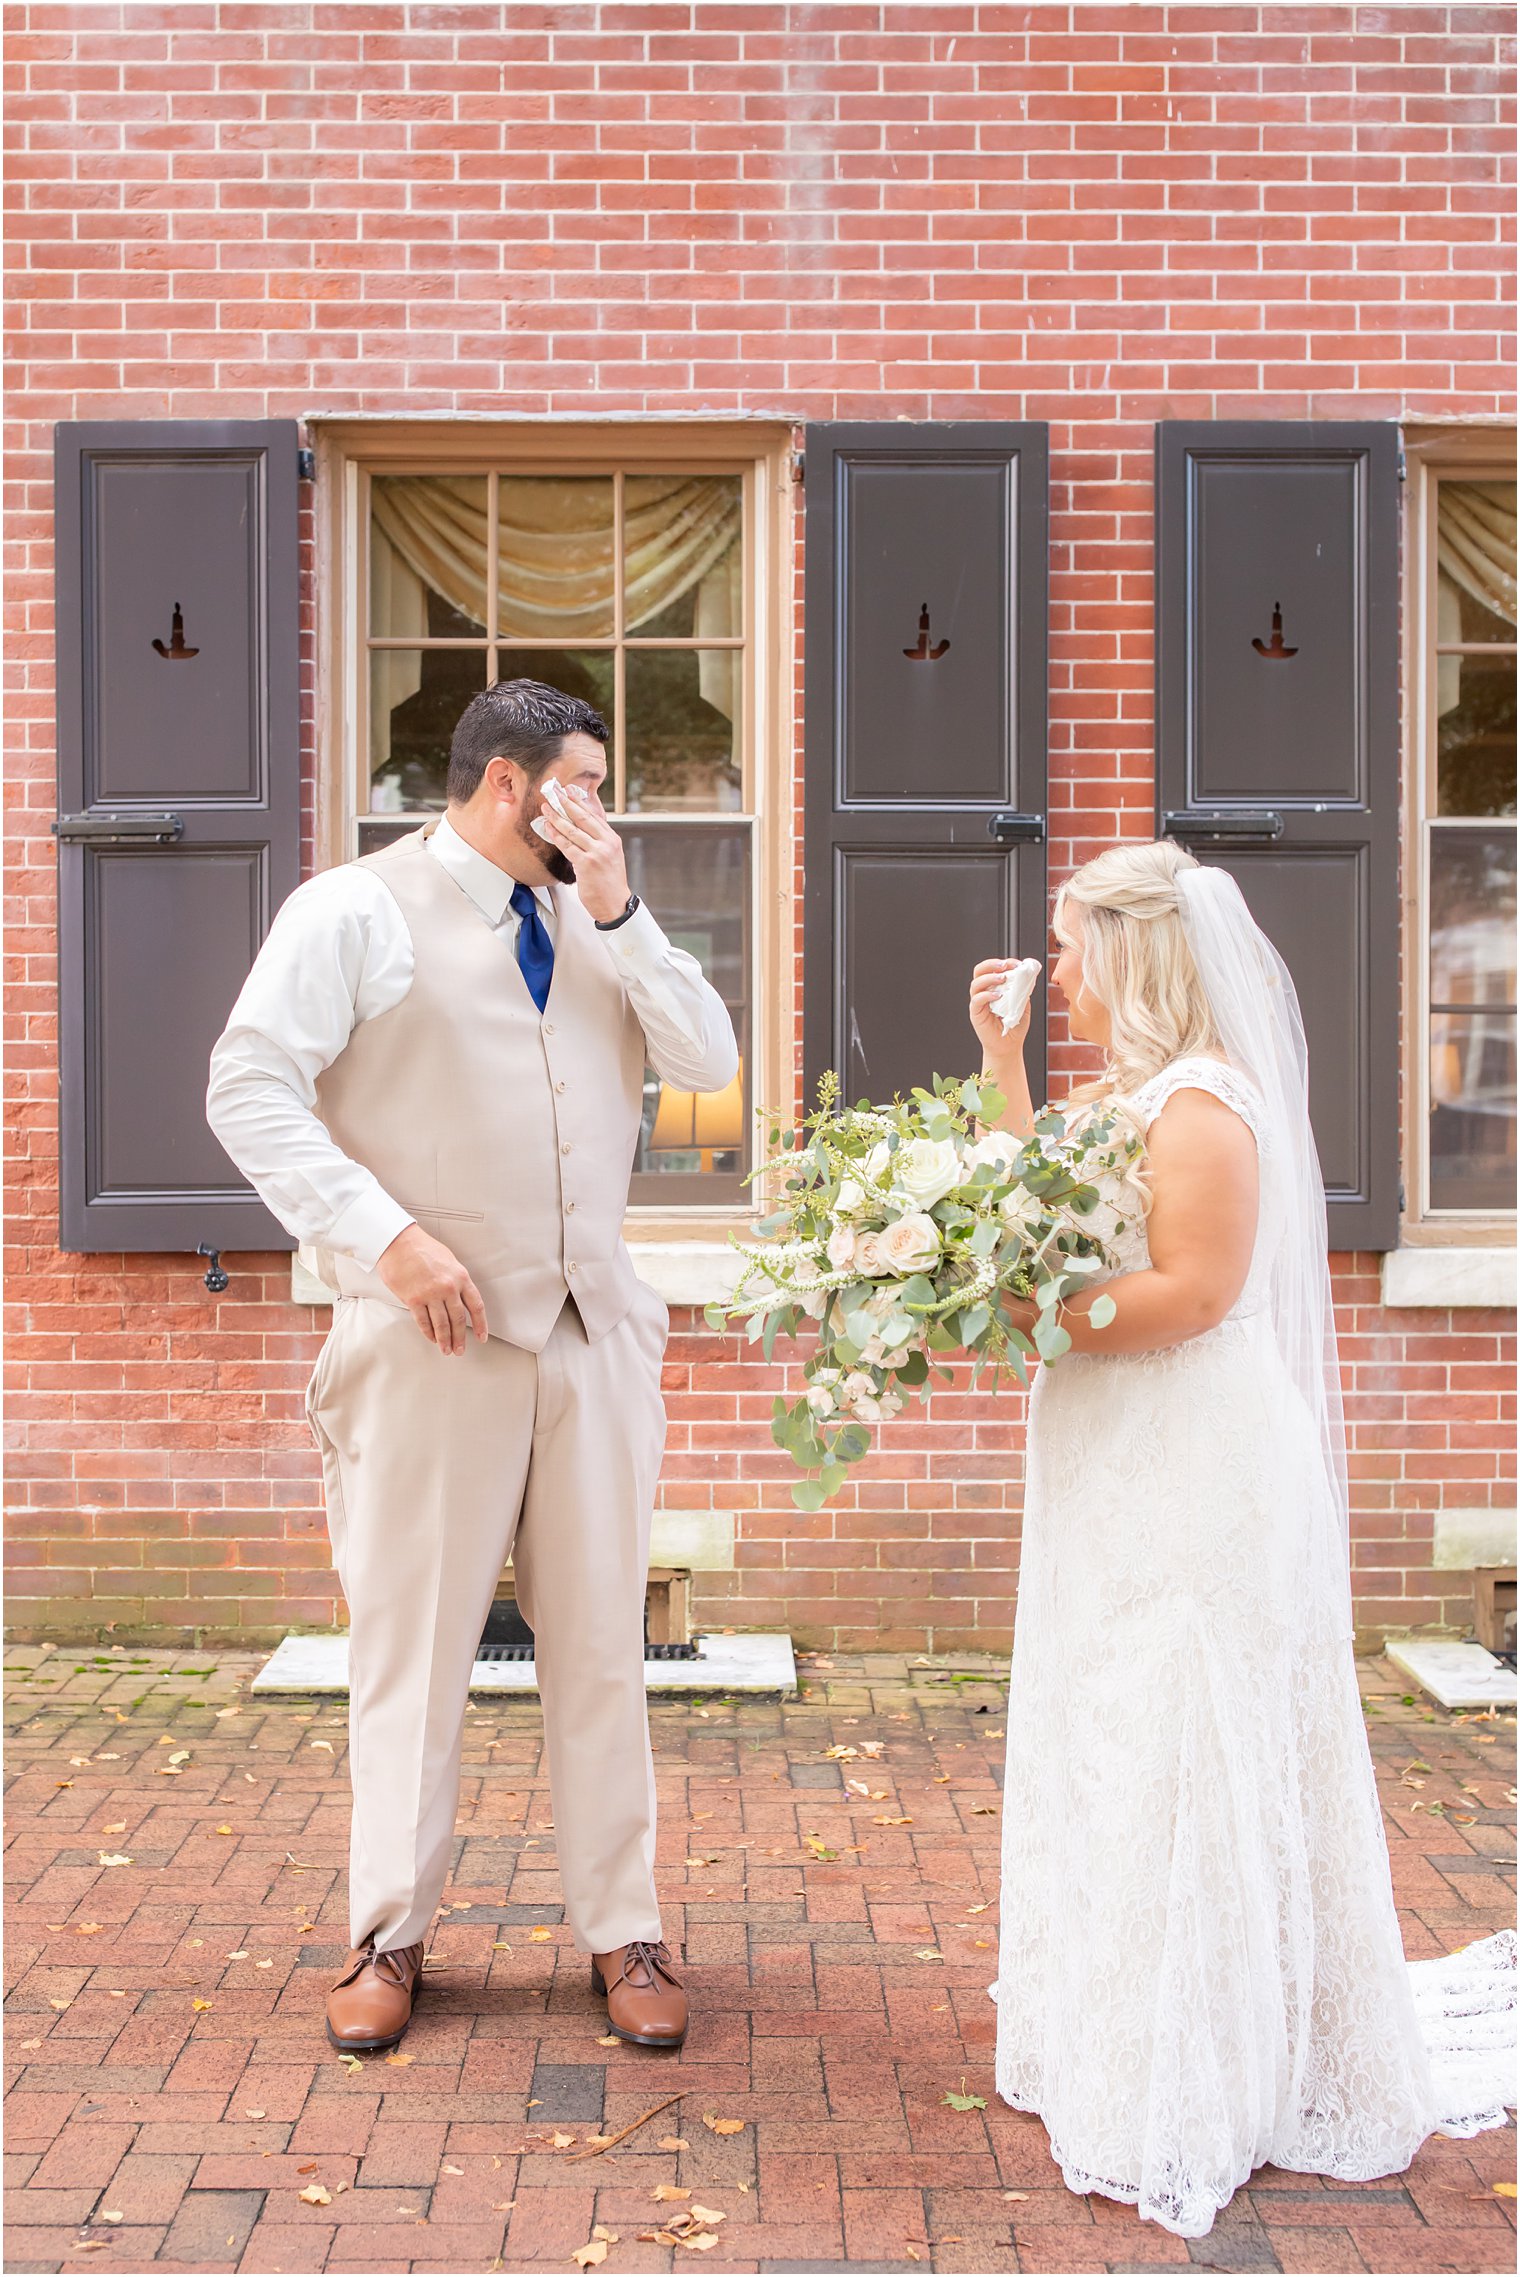 emotional first look at the Lily Inn on wedding day